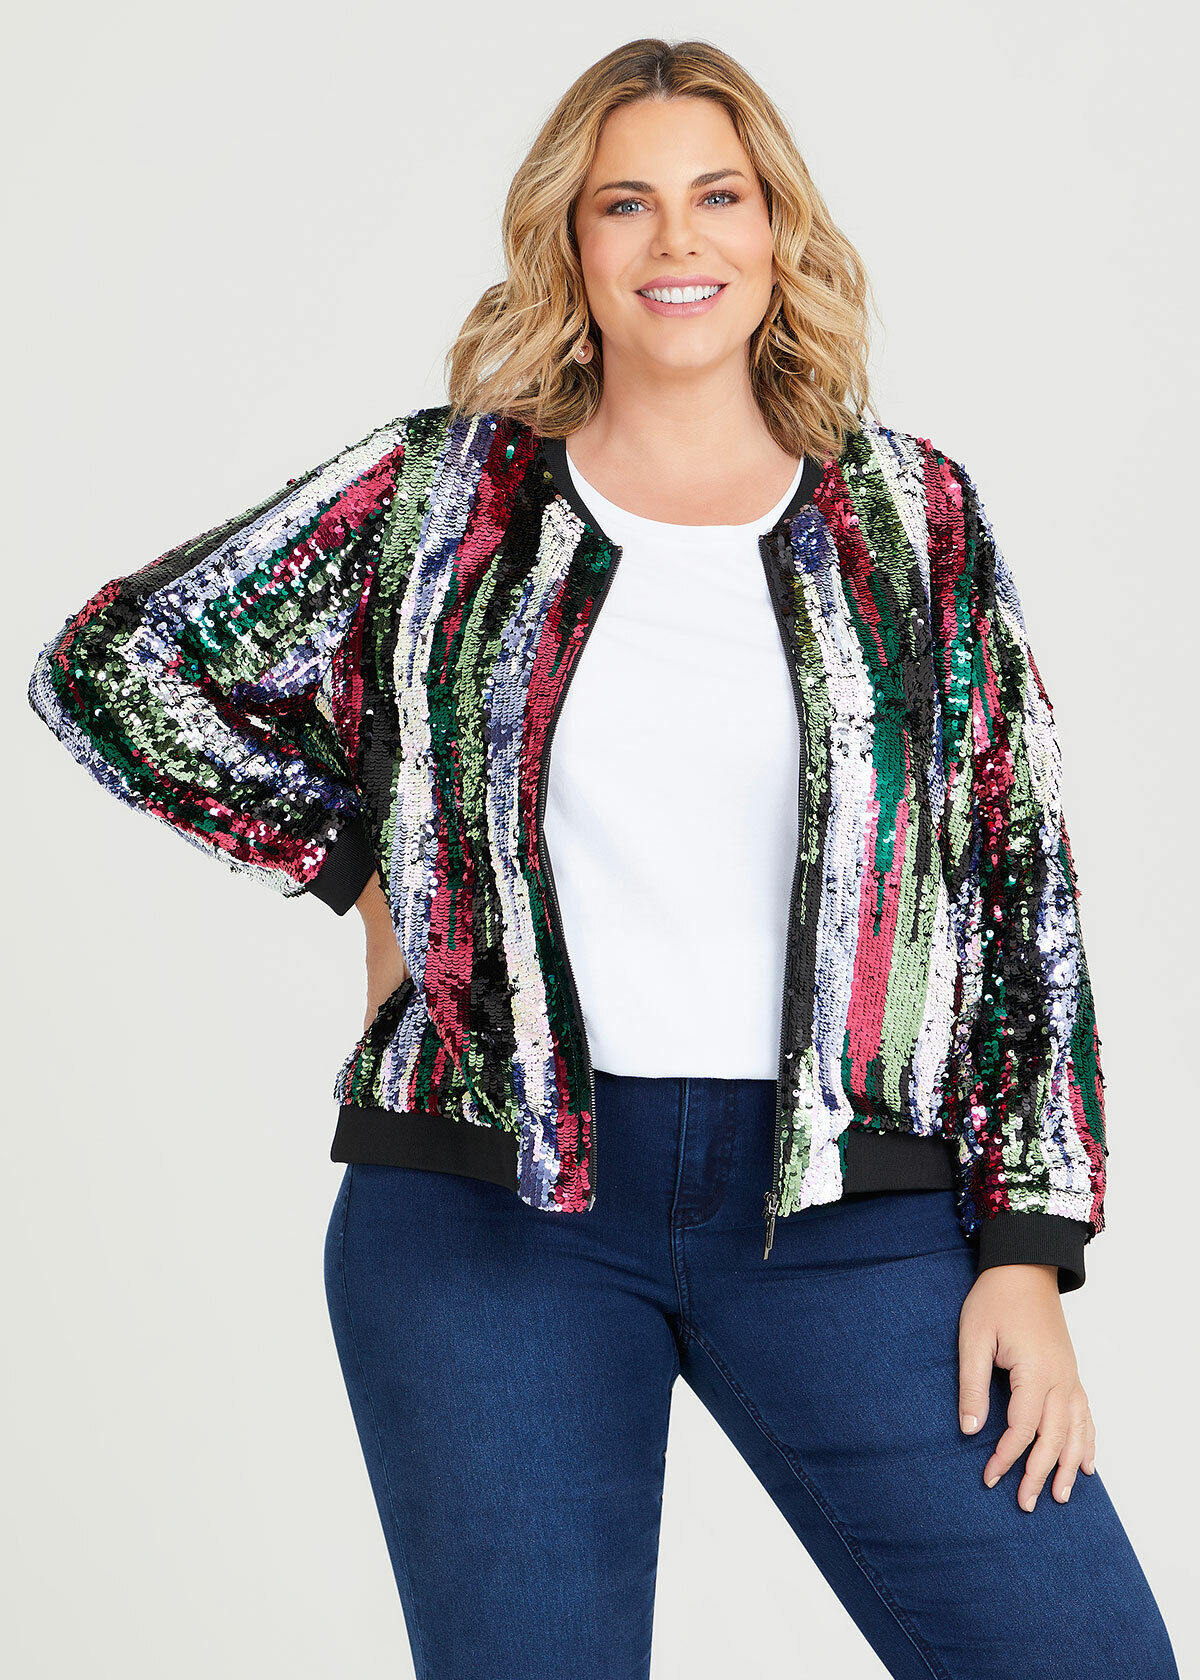 Holographic Silver Sequin Jacket Womens | Love Khaos